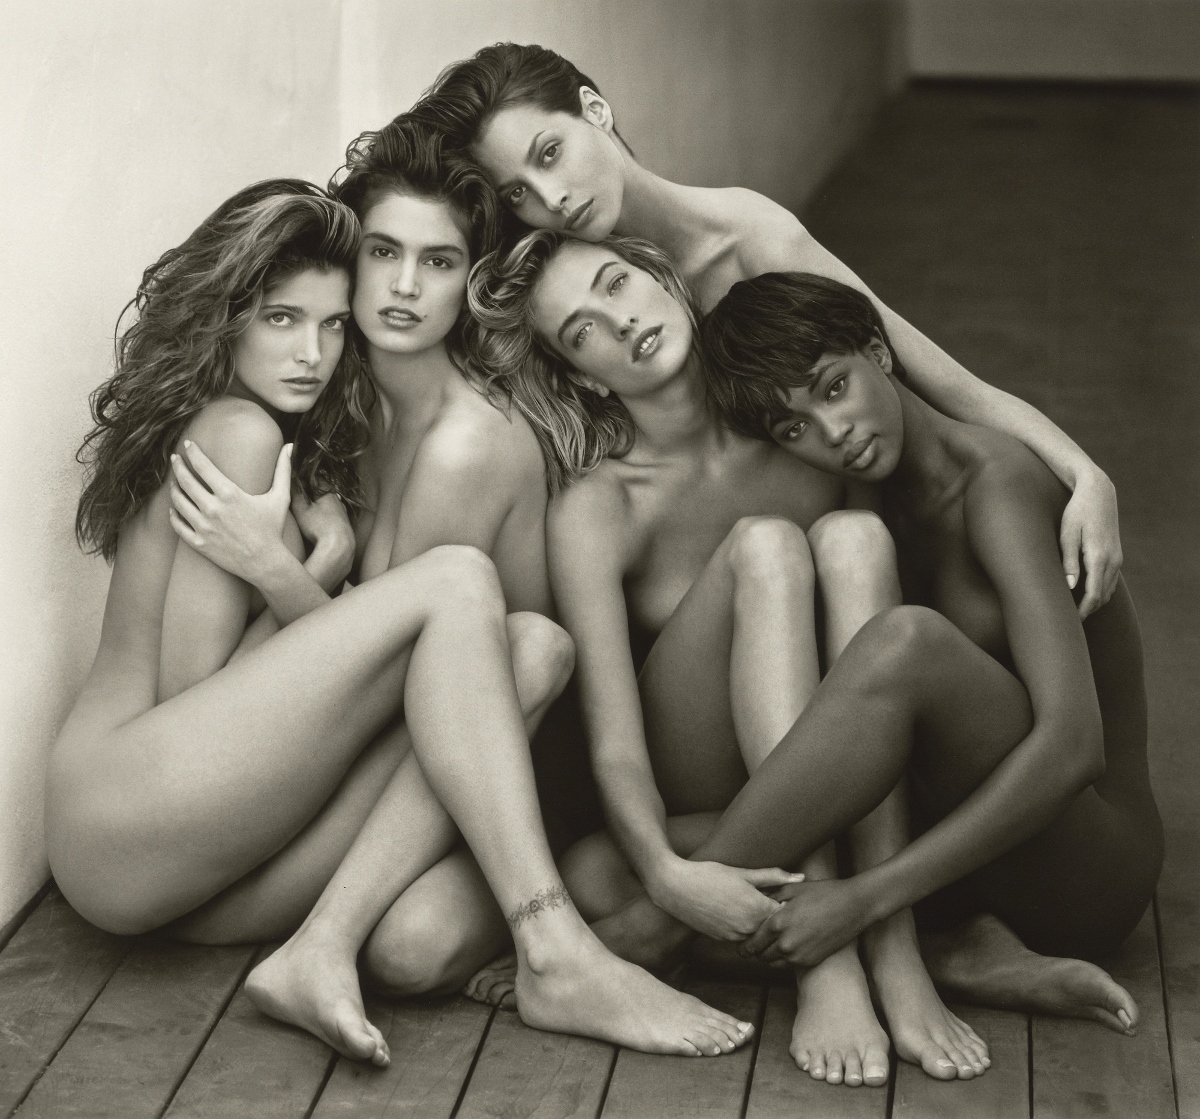 Herb-Ritts-Stephanie-Cindy-Christy-Tatjana-Naomi-Hollywood-1989-Copyright-©-Herb-Ritts-Foundation-Object-Credit-The-J.-Paul-Getty-Museum-Los-Angeles-Gift-of-Herb-Ritts-Foundation